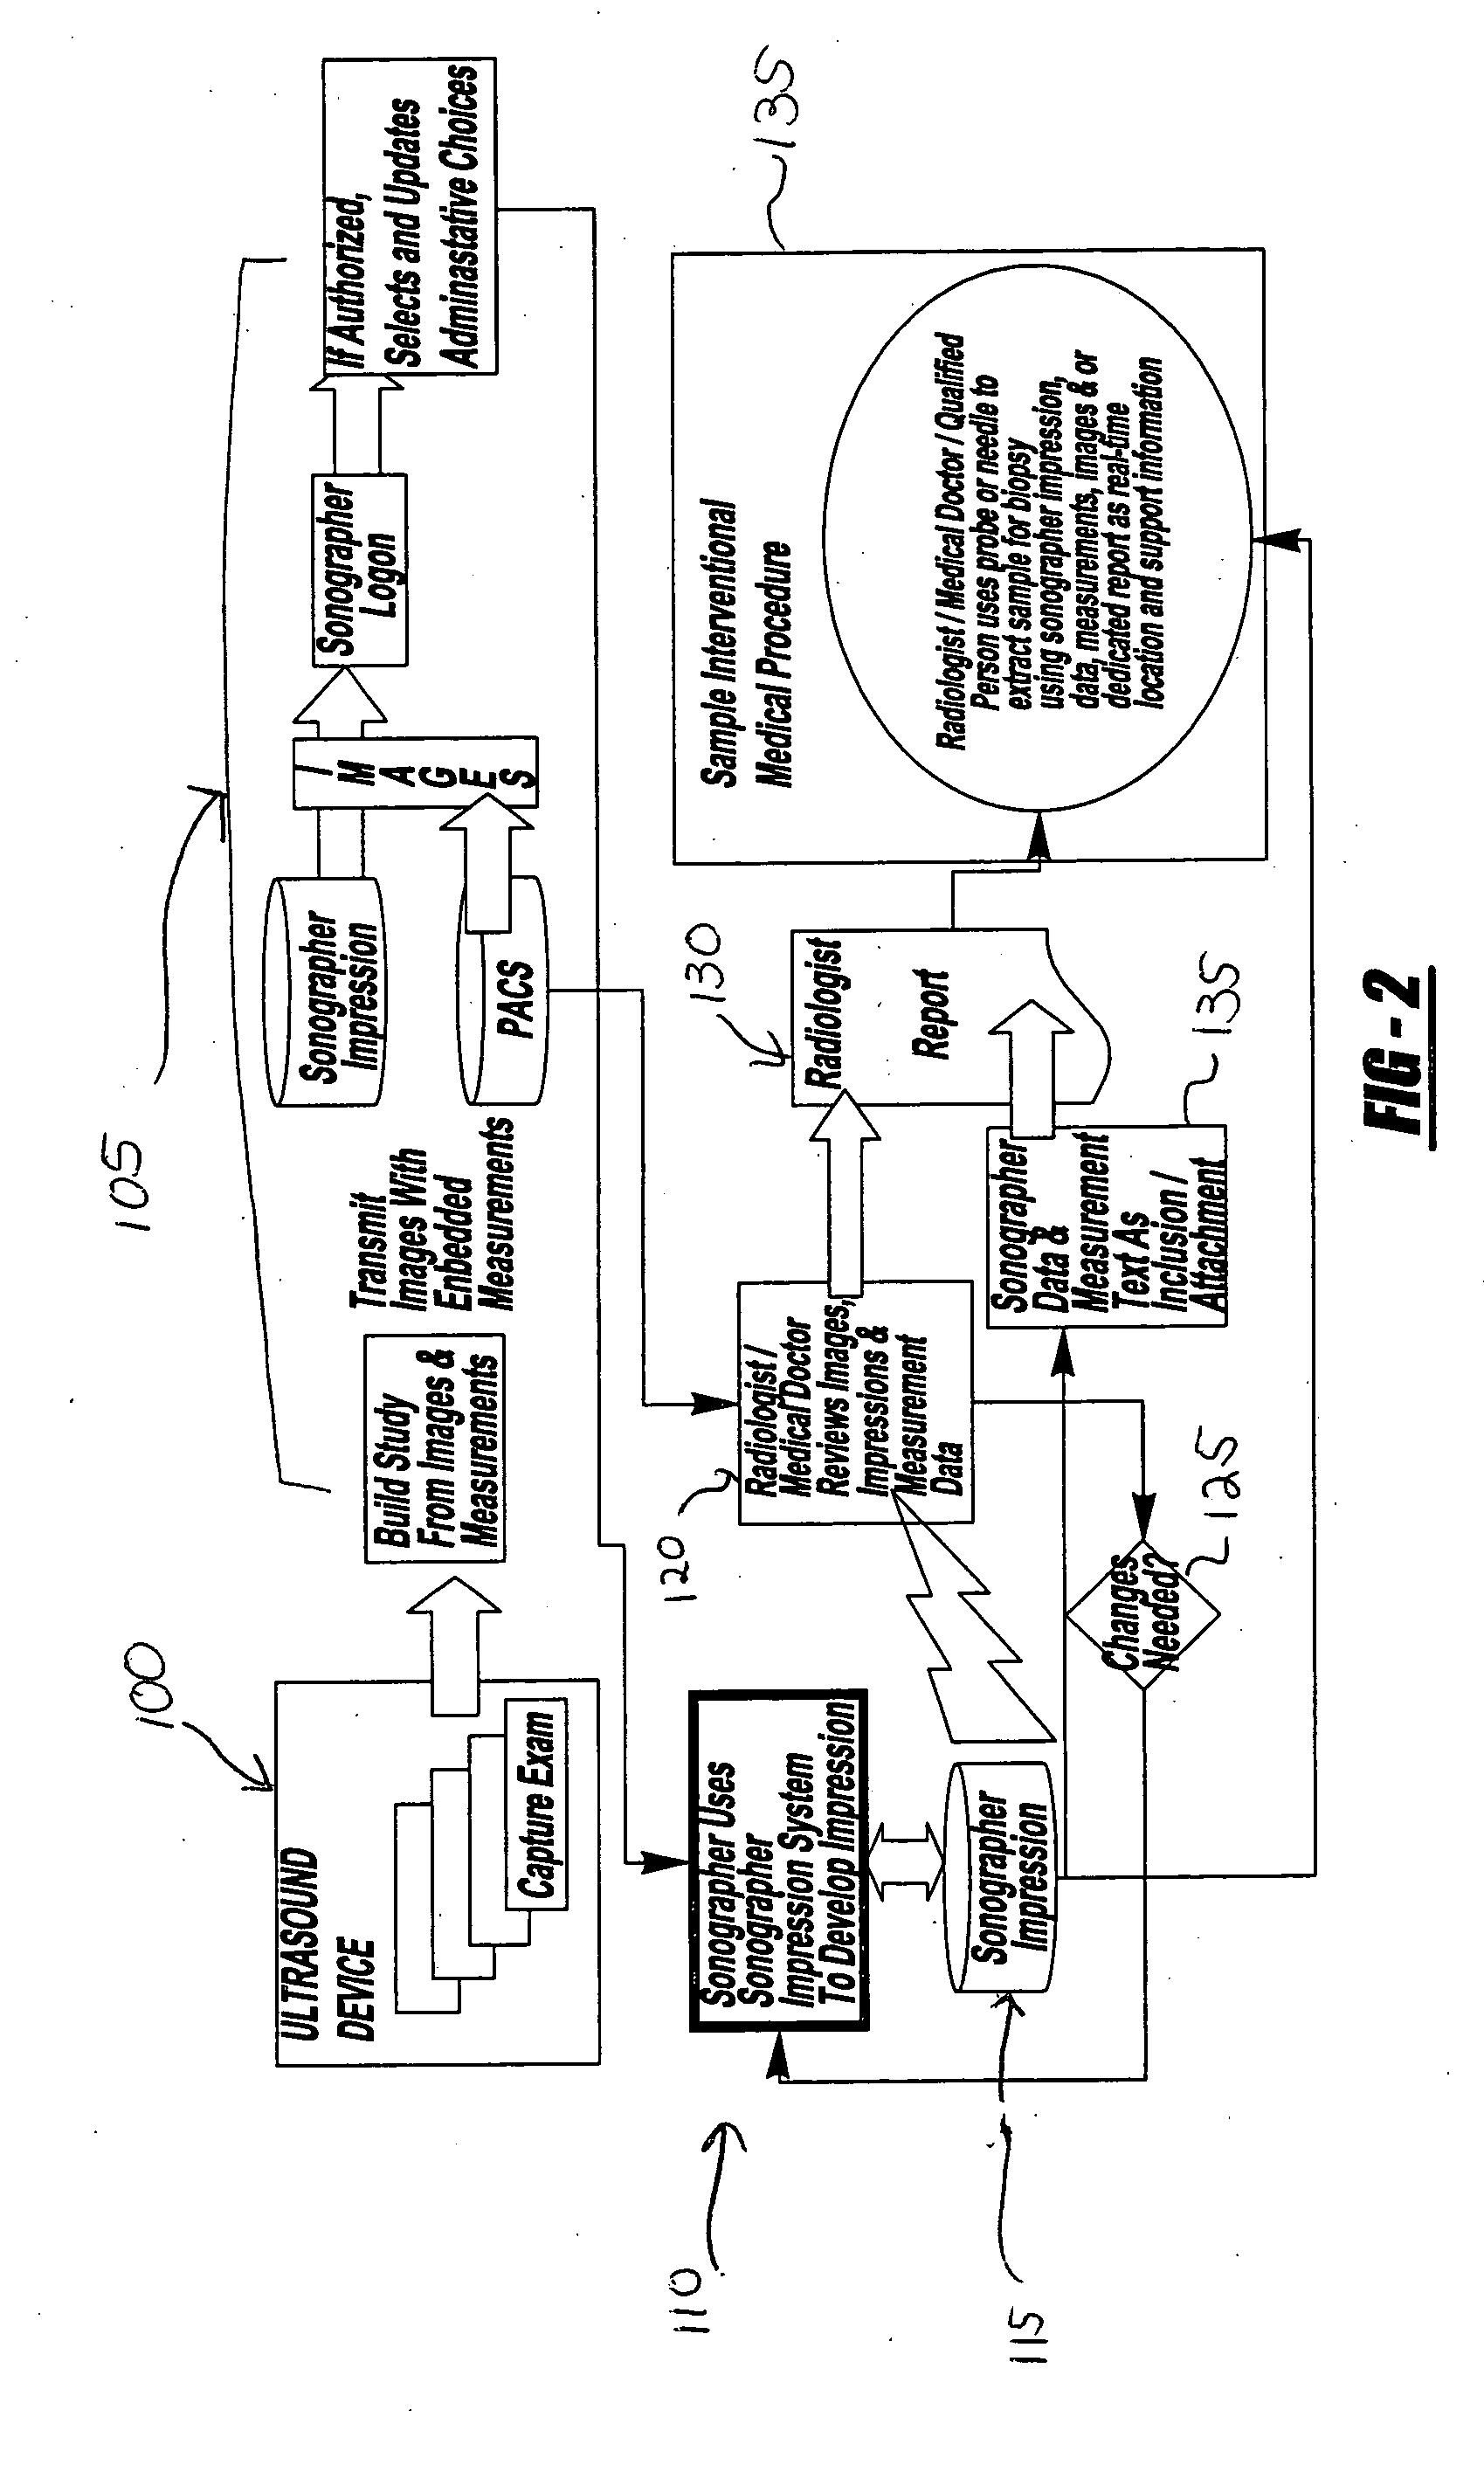 System and method of capturing and managing information during a medical diagnostic imaging procedure